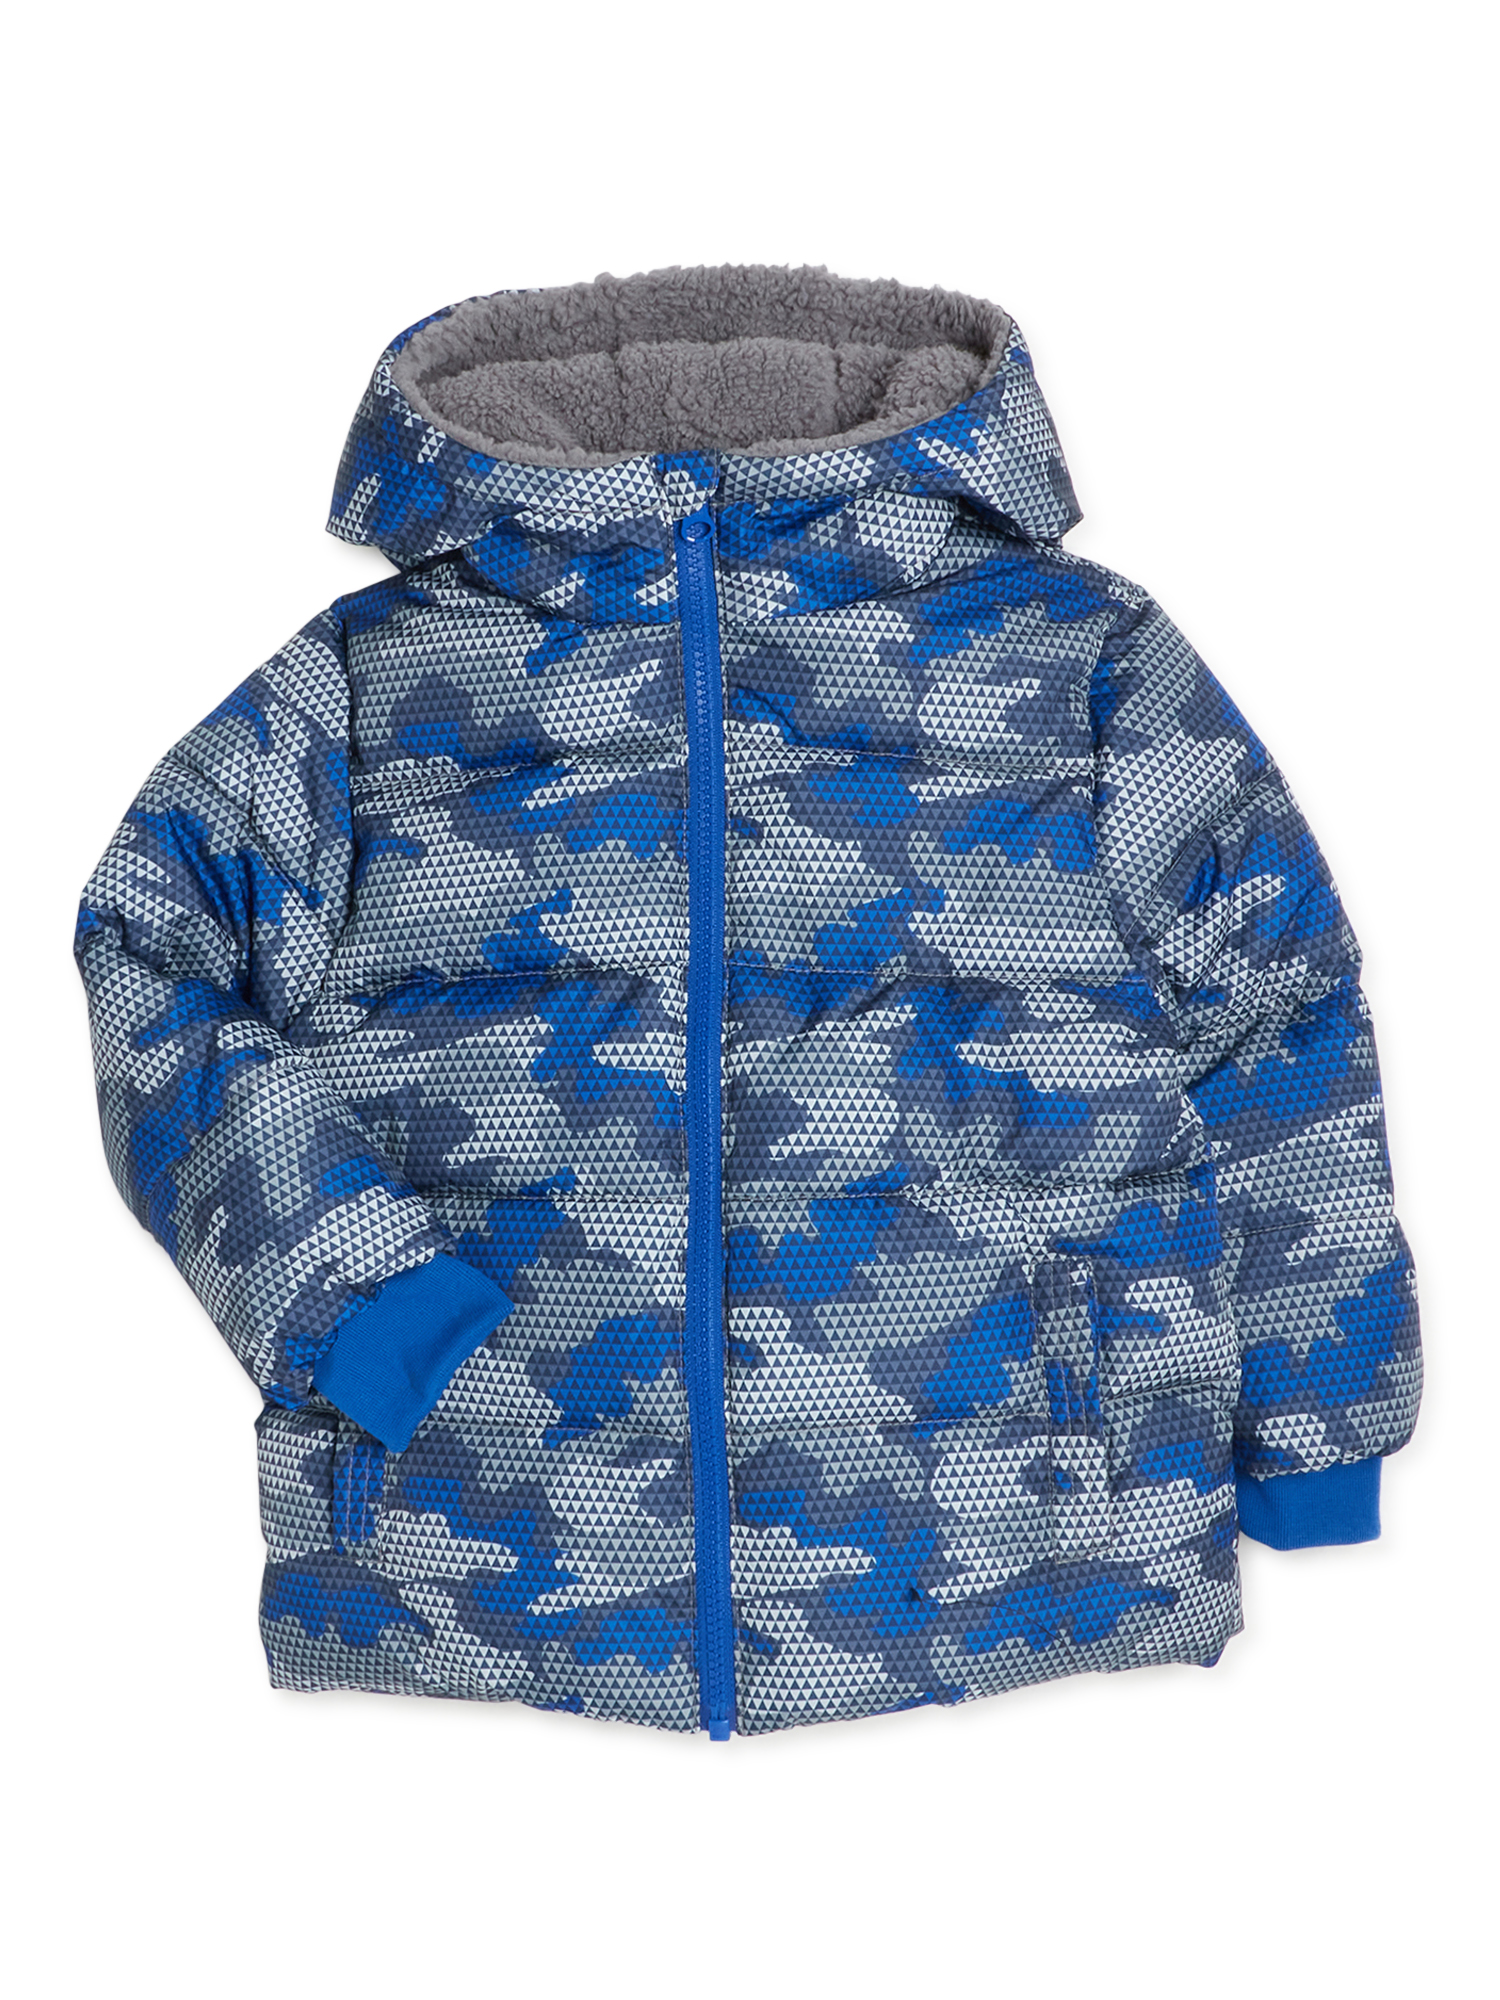 Swiss Tech Baby and Toddler Boy Puffer Jacket, Sizes 12M-5T - image 1 of 3